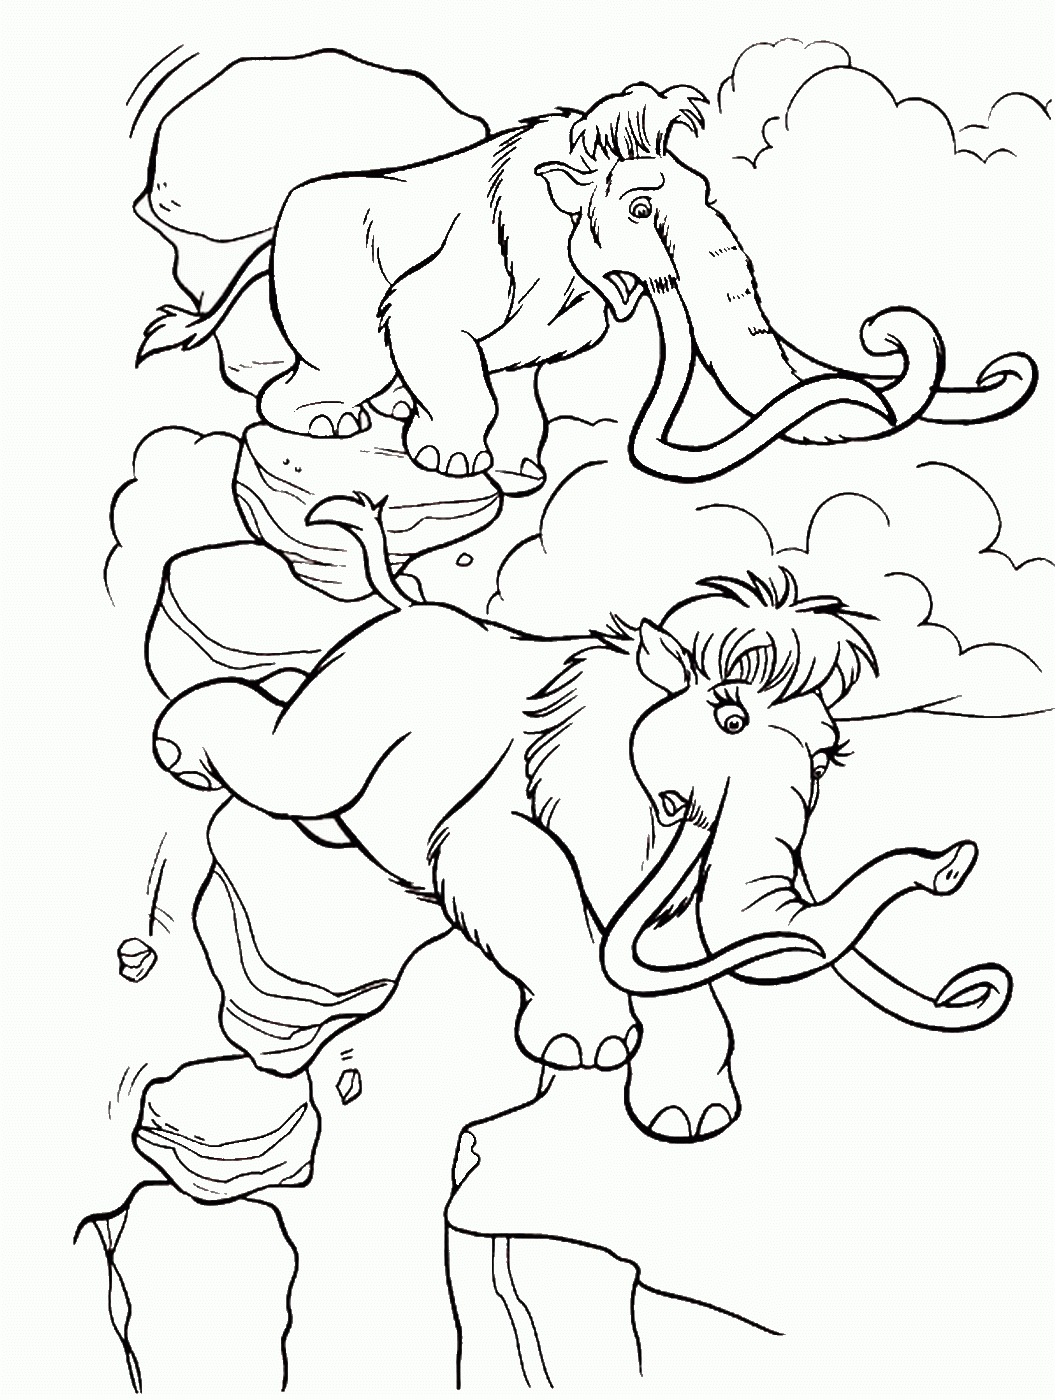 Ice Age Coloring Pages Cartoons ice age 37 Printable 2020 3403 Coloring4free